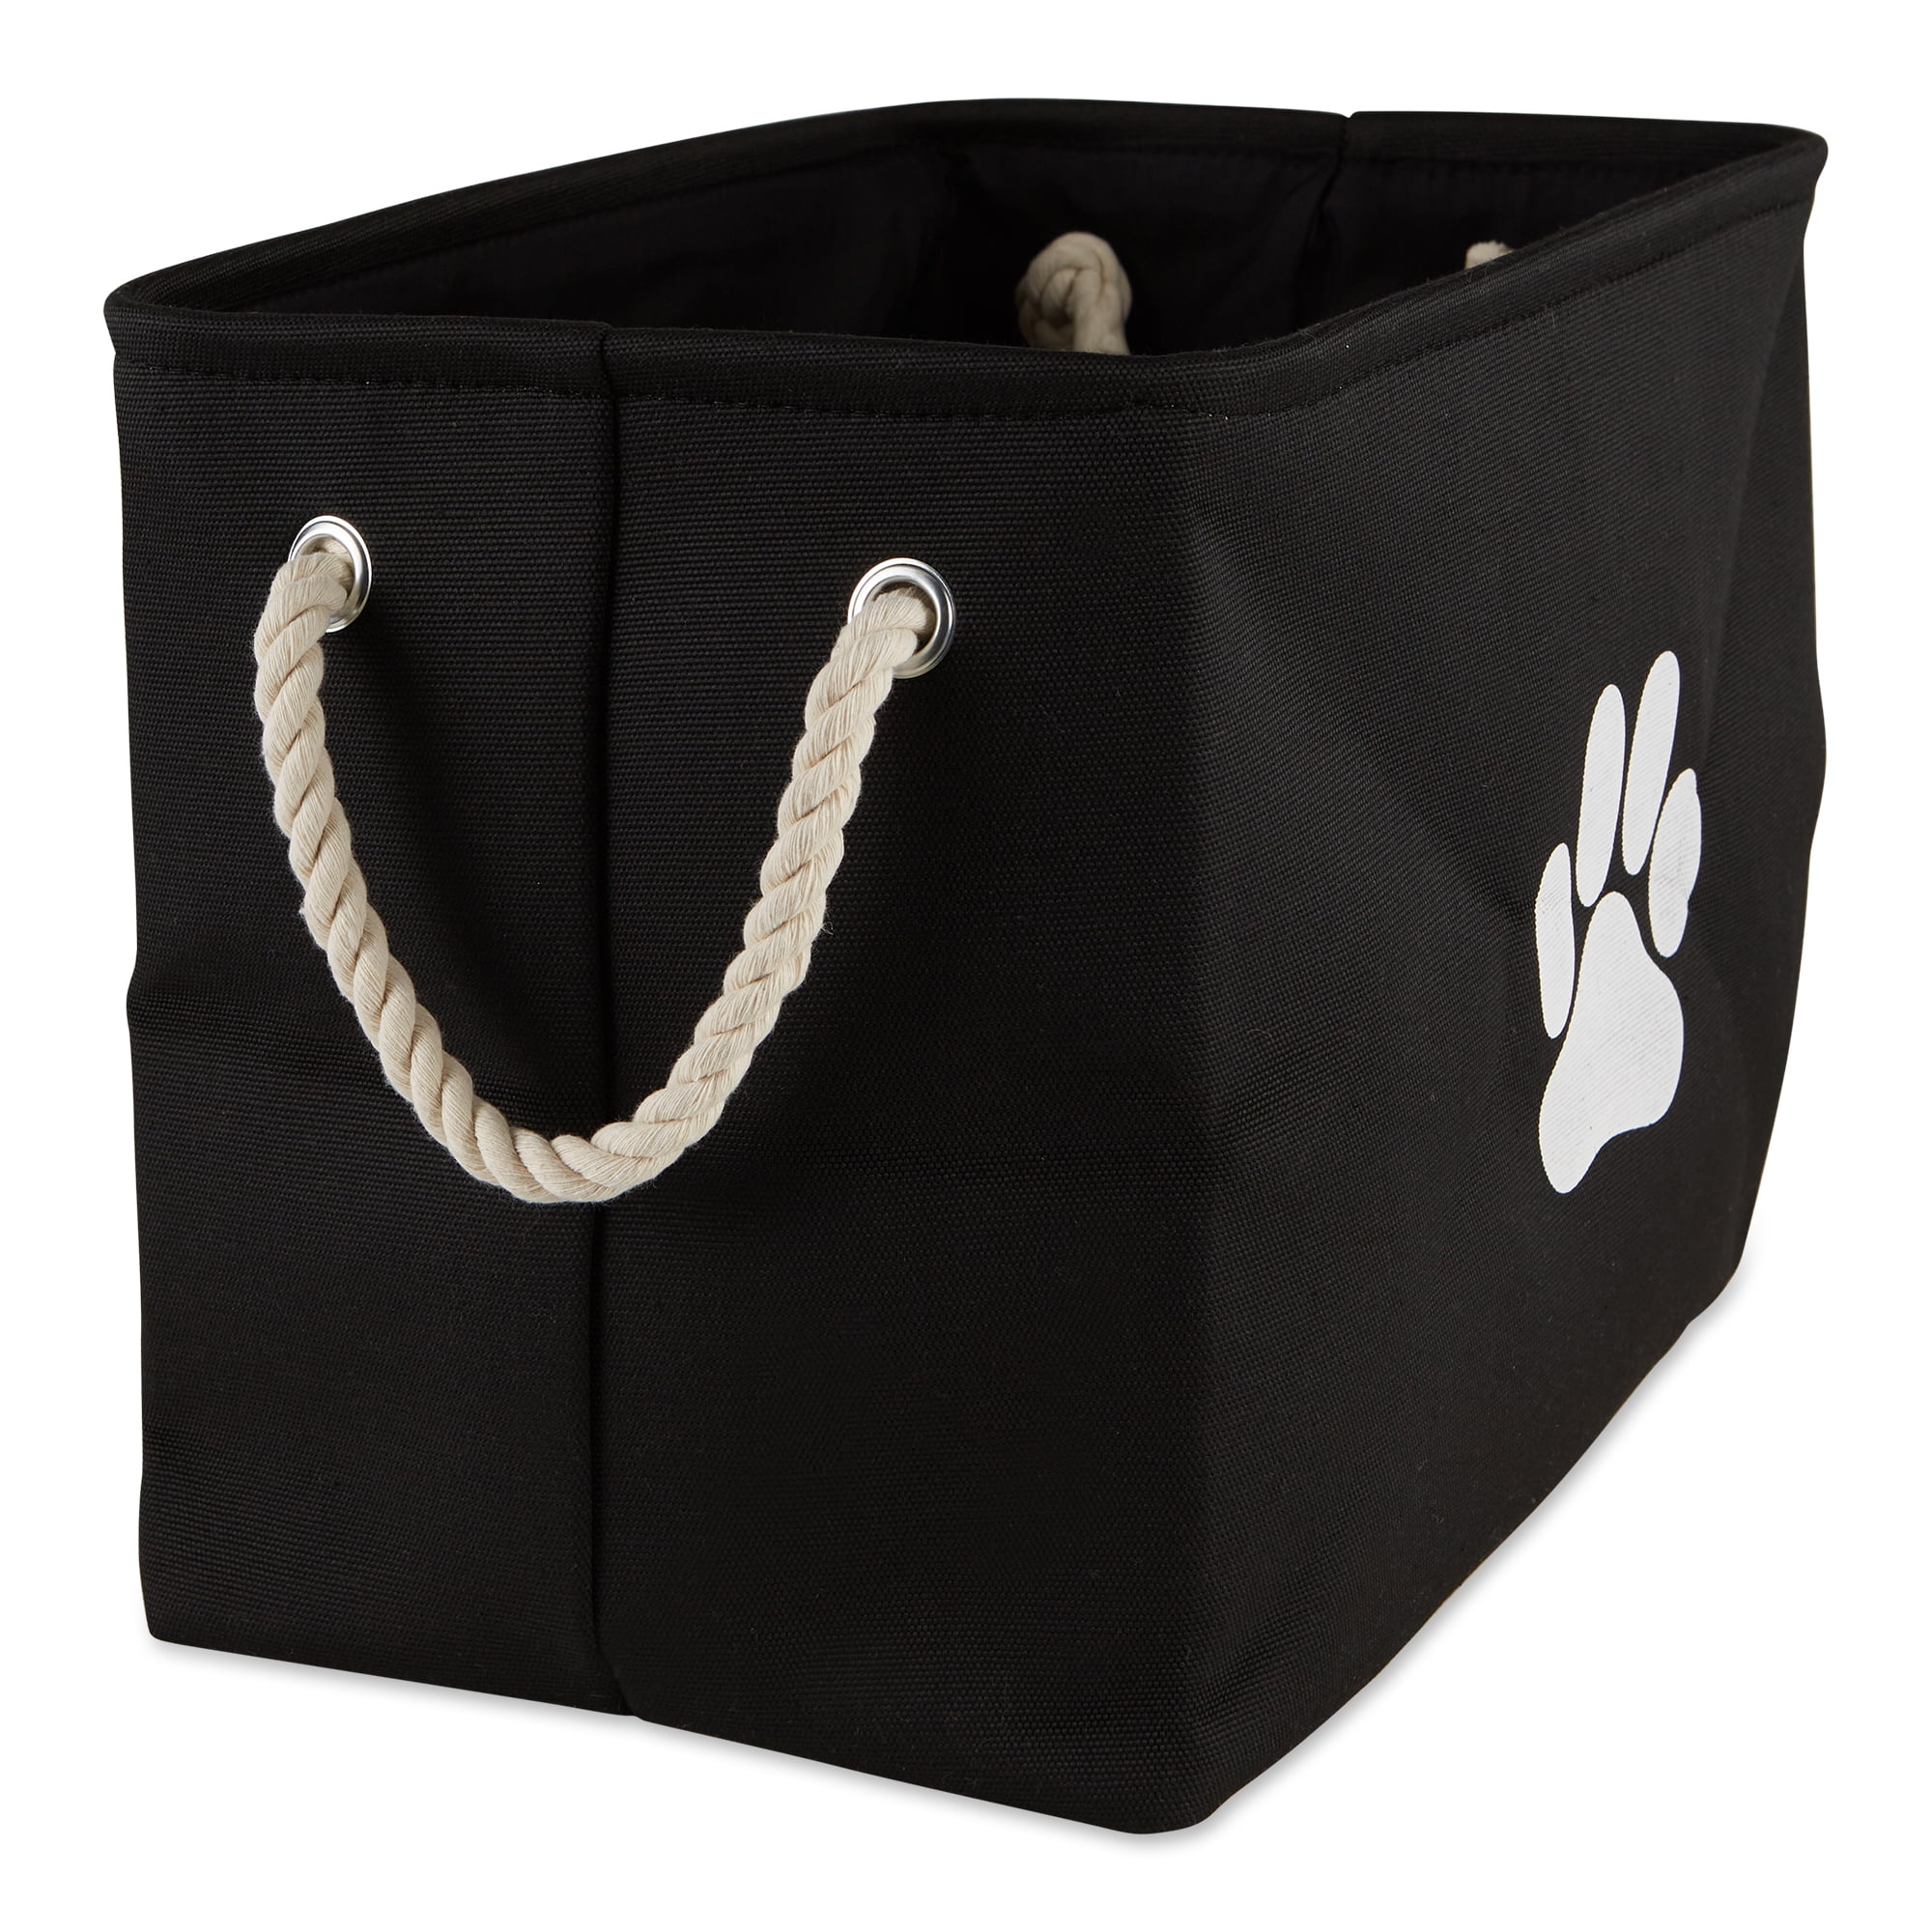 Picture of Design Imports CAMZ12487 Paw Rectangle Polyester Pet Bin, Black - Large